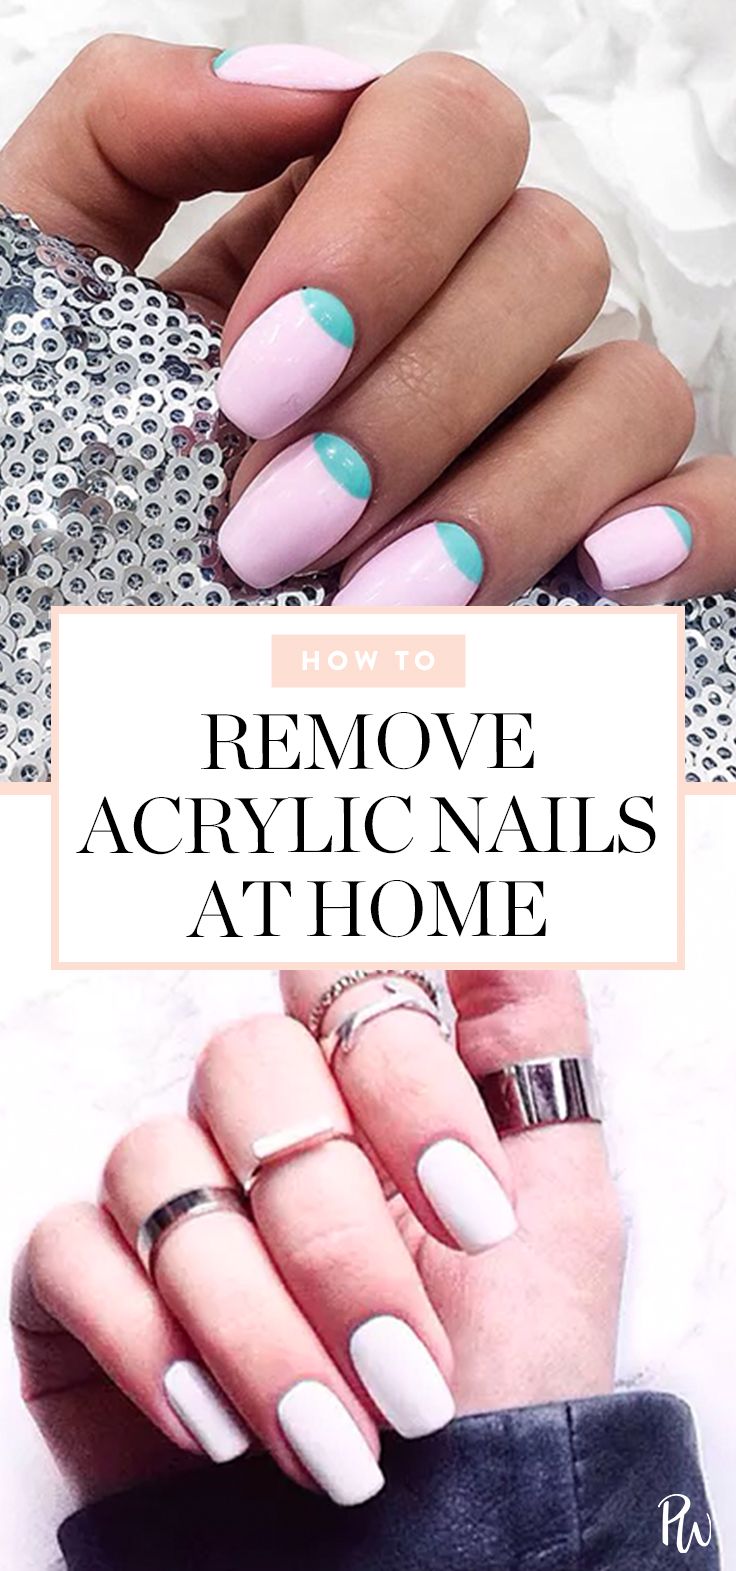 Life Hacks : How to Remove Acrylic Nails at Home - Destionation DIY ...